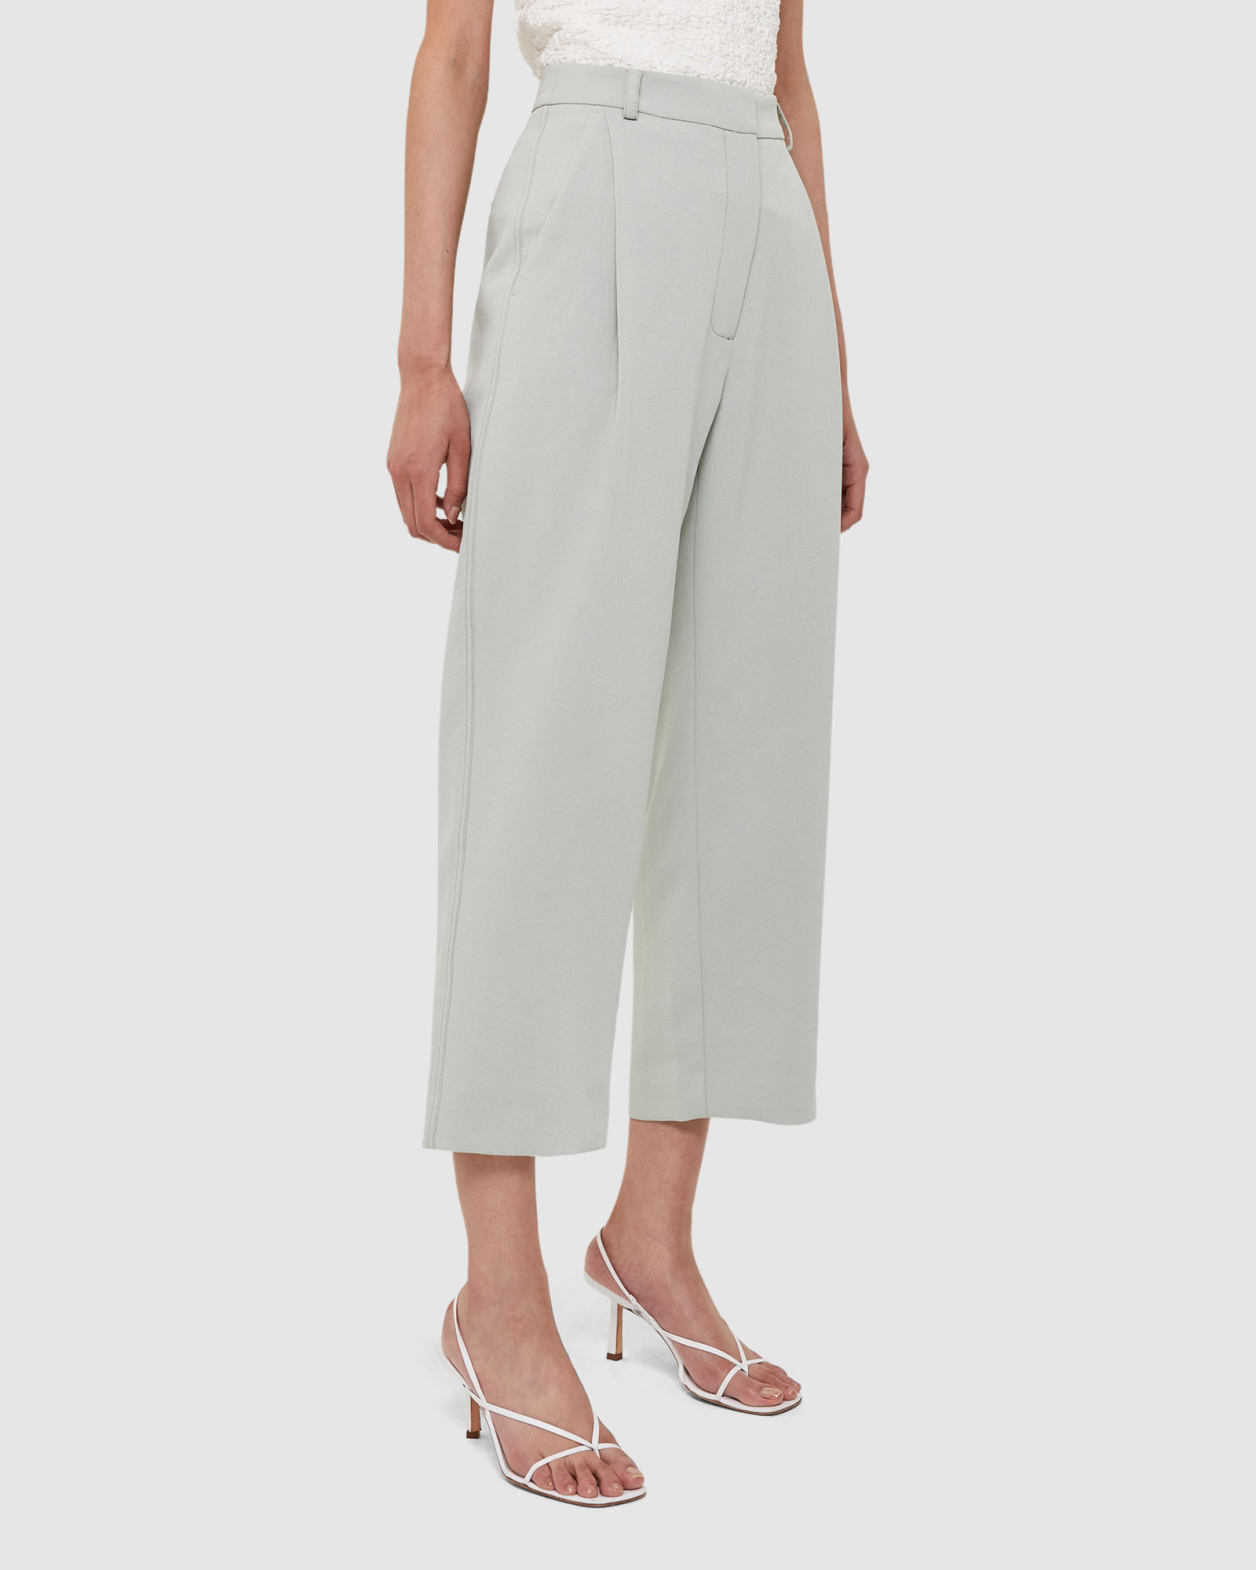 Dharma Tuck Front Culotte in MINT